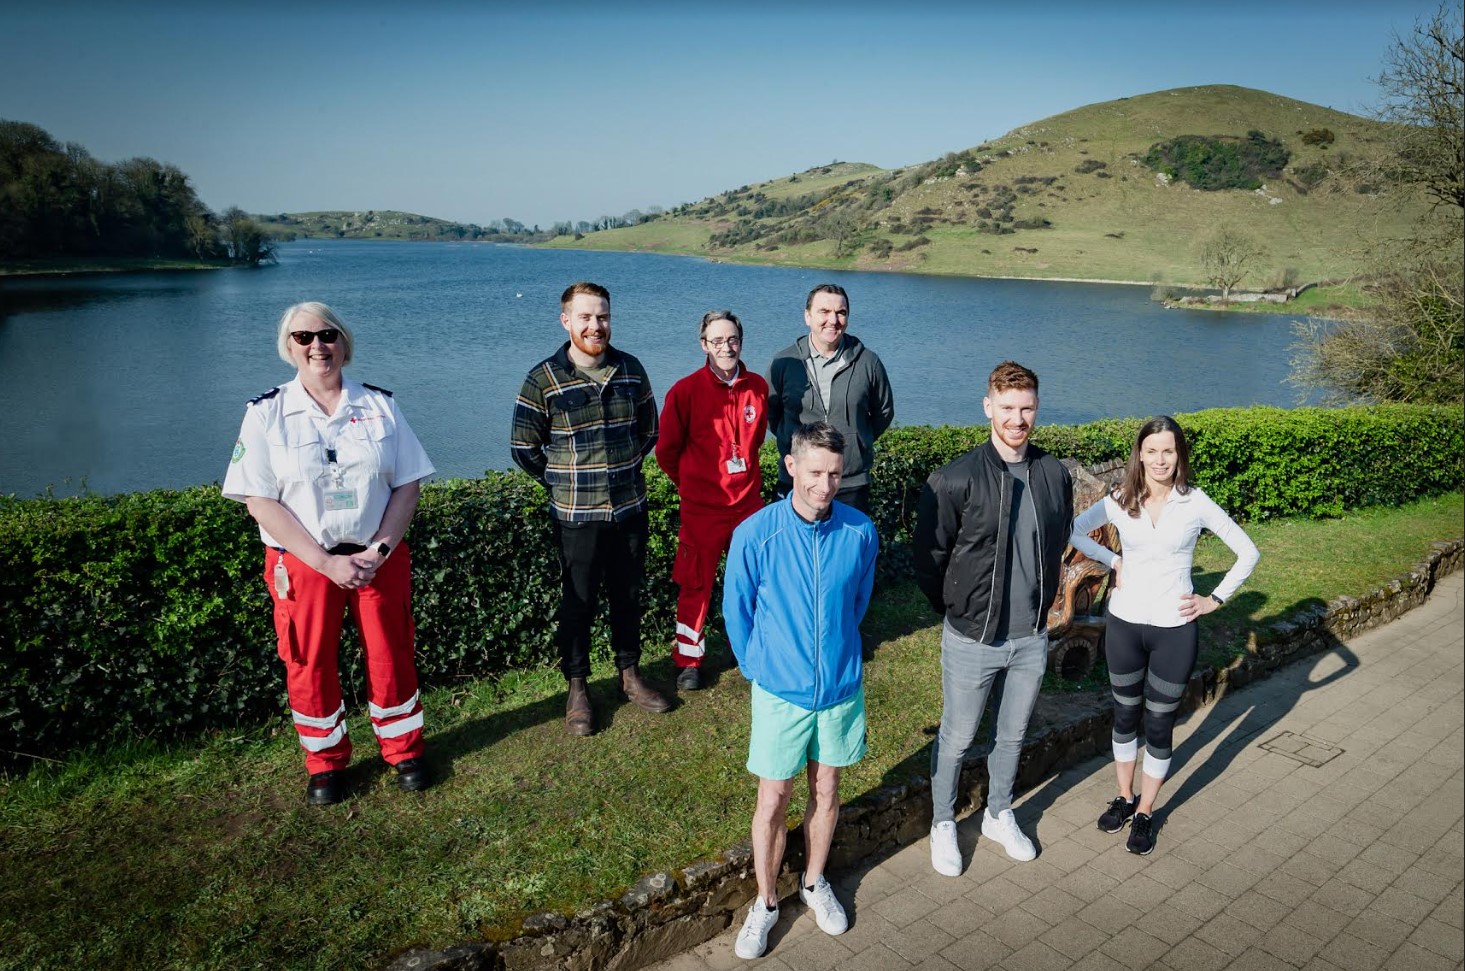 Lough Gur Summer Solstice Challenge - Debbie Carrol from the Irish Red Cross, Brian Flynn, Michael Garvey from the Irish Red Cross, Anthony Kirby (back row) and Brian Lawlor, Ben Healy and Kate Harrold (Front row).